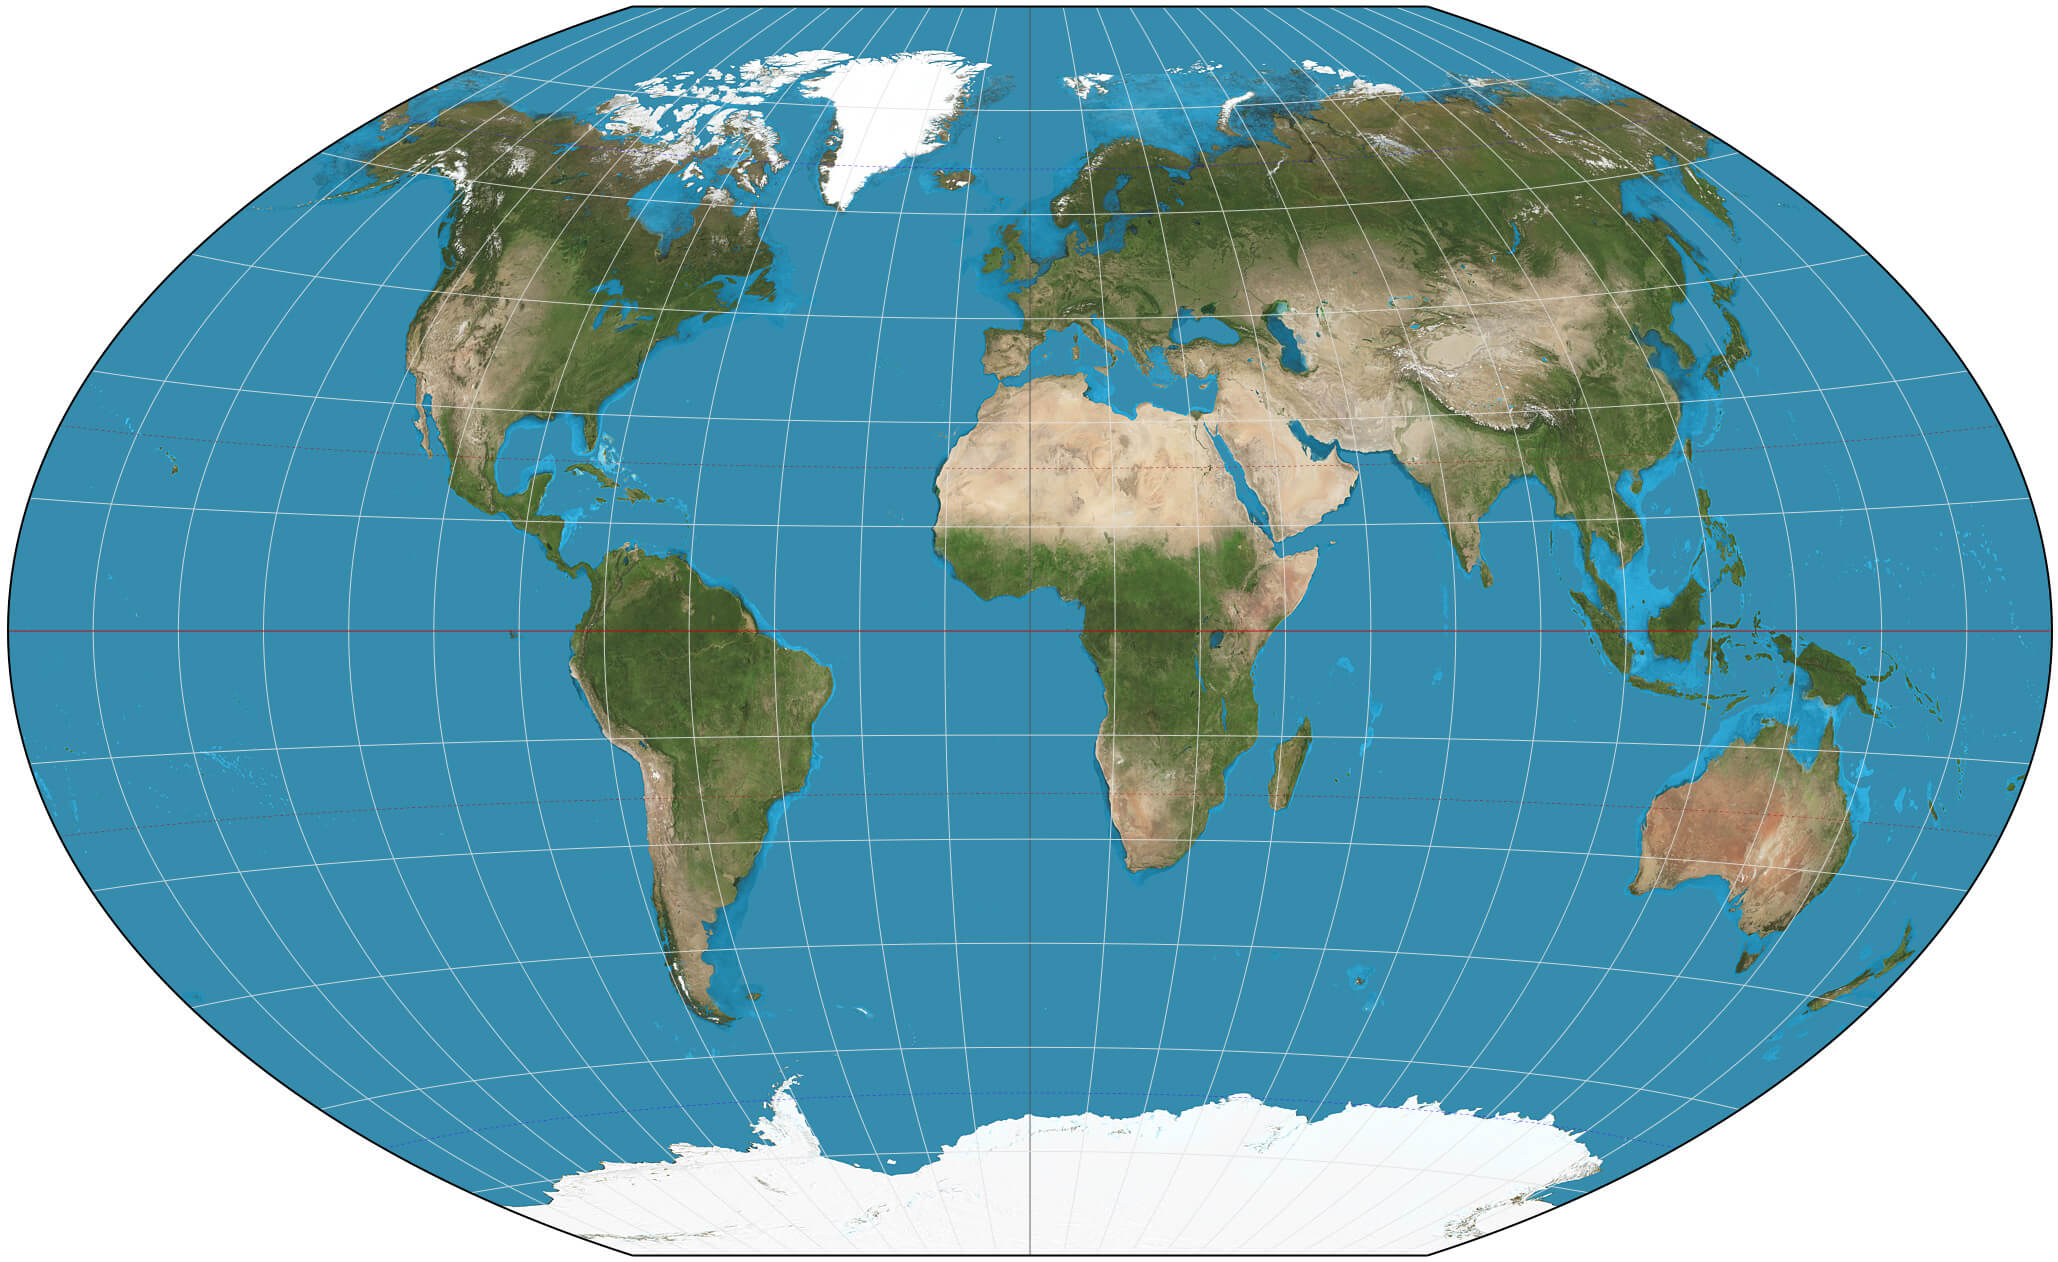 A projection of the world, showing continents and oceans